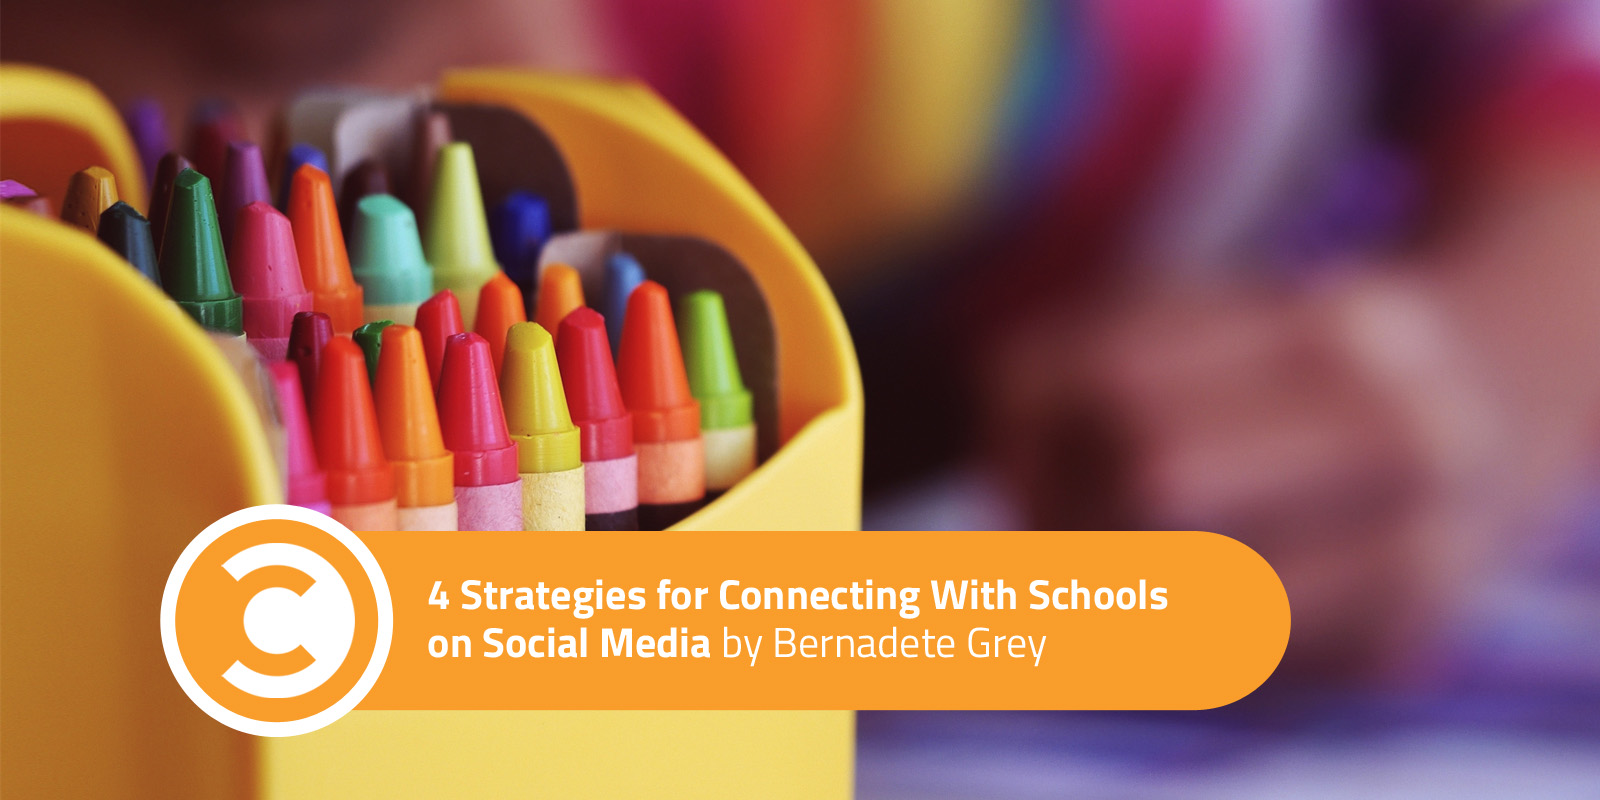 4 Strategies for Connecting With Schools on Social Media